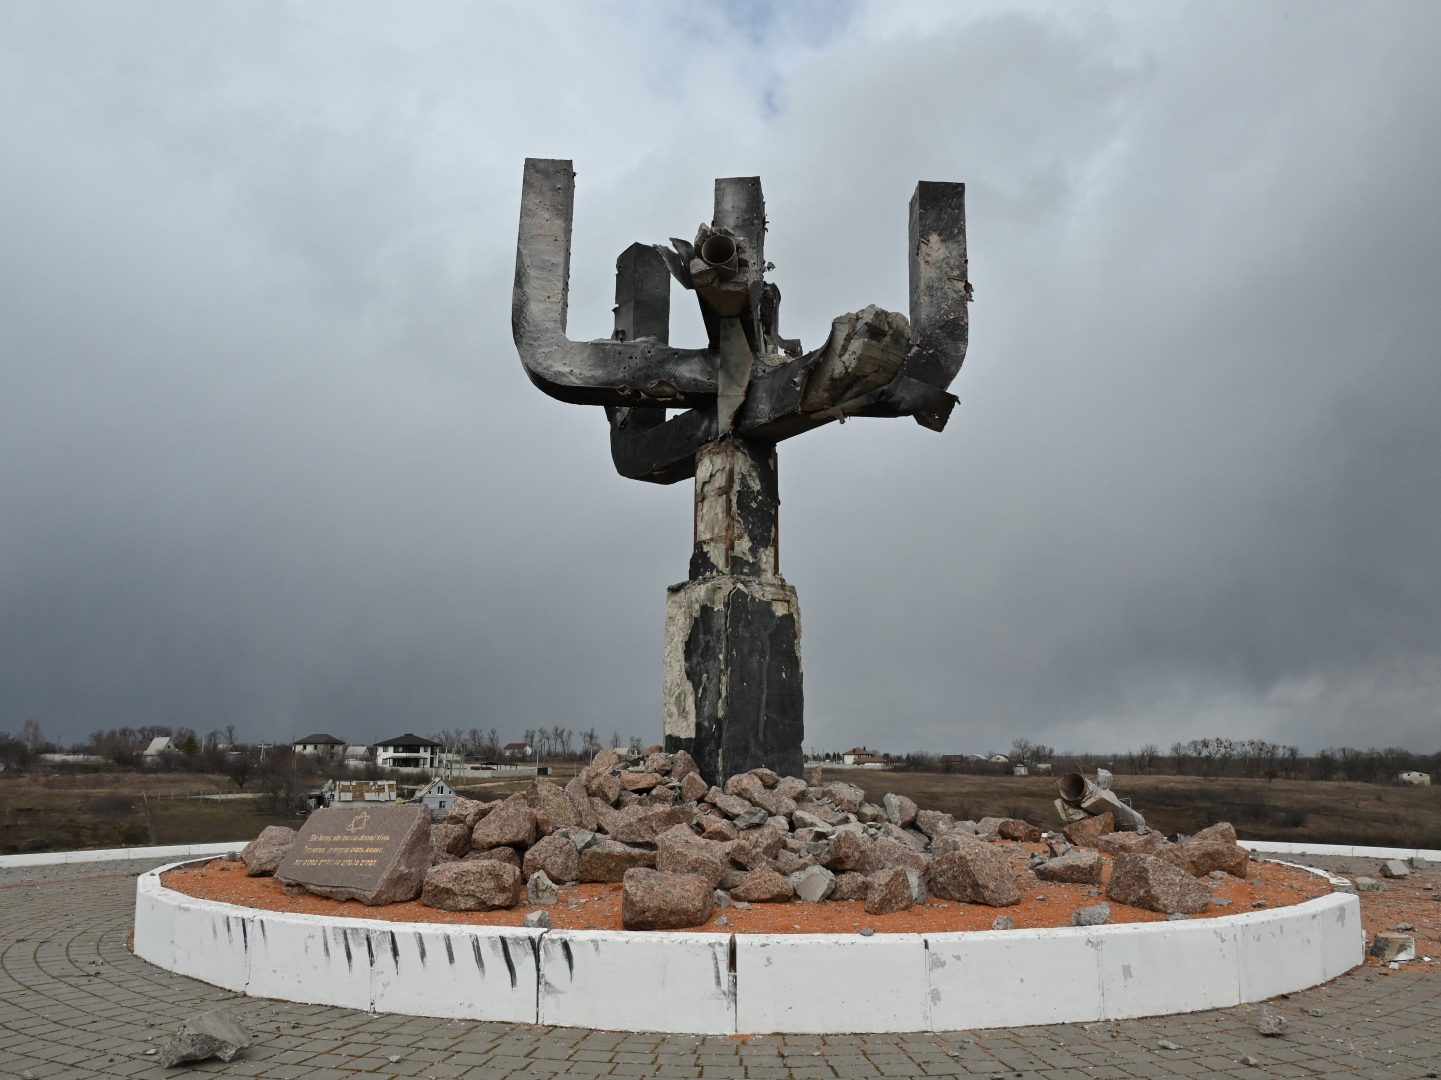 TOPSHOT - A picture taken on March 27, 2022 shows a view of the Menorah memorial, set on the place of a mass killing of Jewish people by Nazis during WWII, a day after it was damaged in a Russian shelling, at the entrance of the Drobitsky Yar Holocaust memorial complex on the eastern outskirts of Kharkiv. (Photo by Sergey BOBOK / AFP) (Photo by SERGEY BOBOK/AFP via Getty Images)